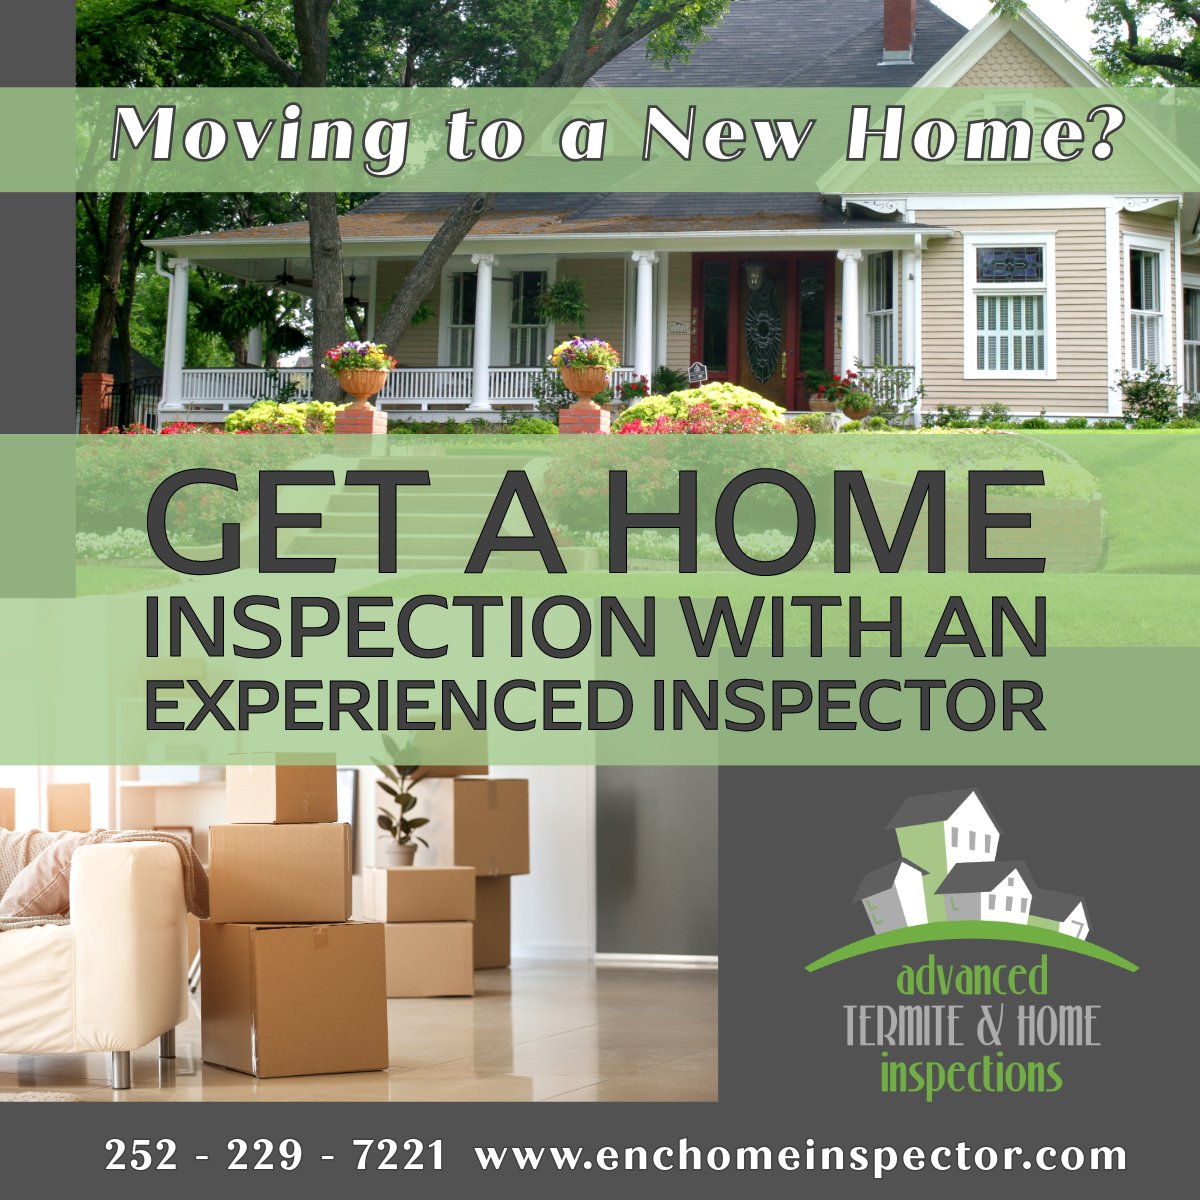 If you're moving, whether you're buying or selling a home, getting a home inspection is crucial. #homeinspection #homeinspector #advancedtermitehomeinspecttions #sellyourhome #movingtoNC #easternNC #realtor